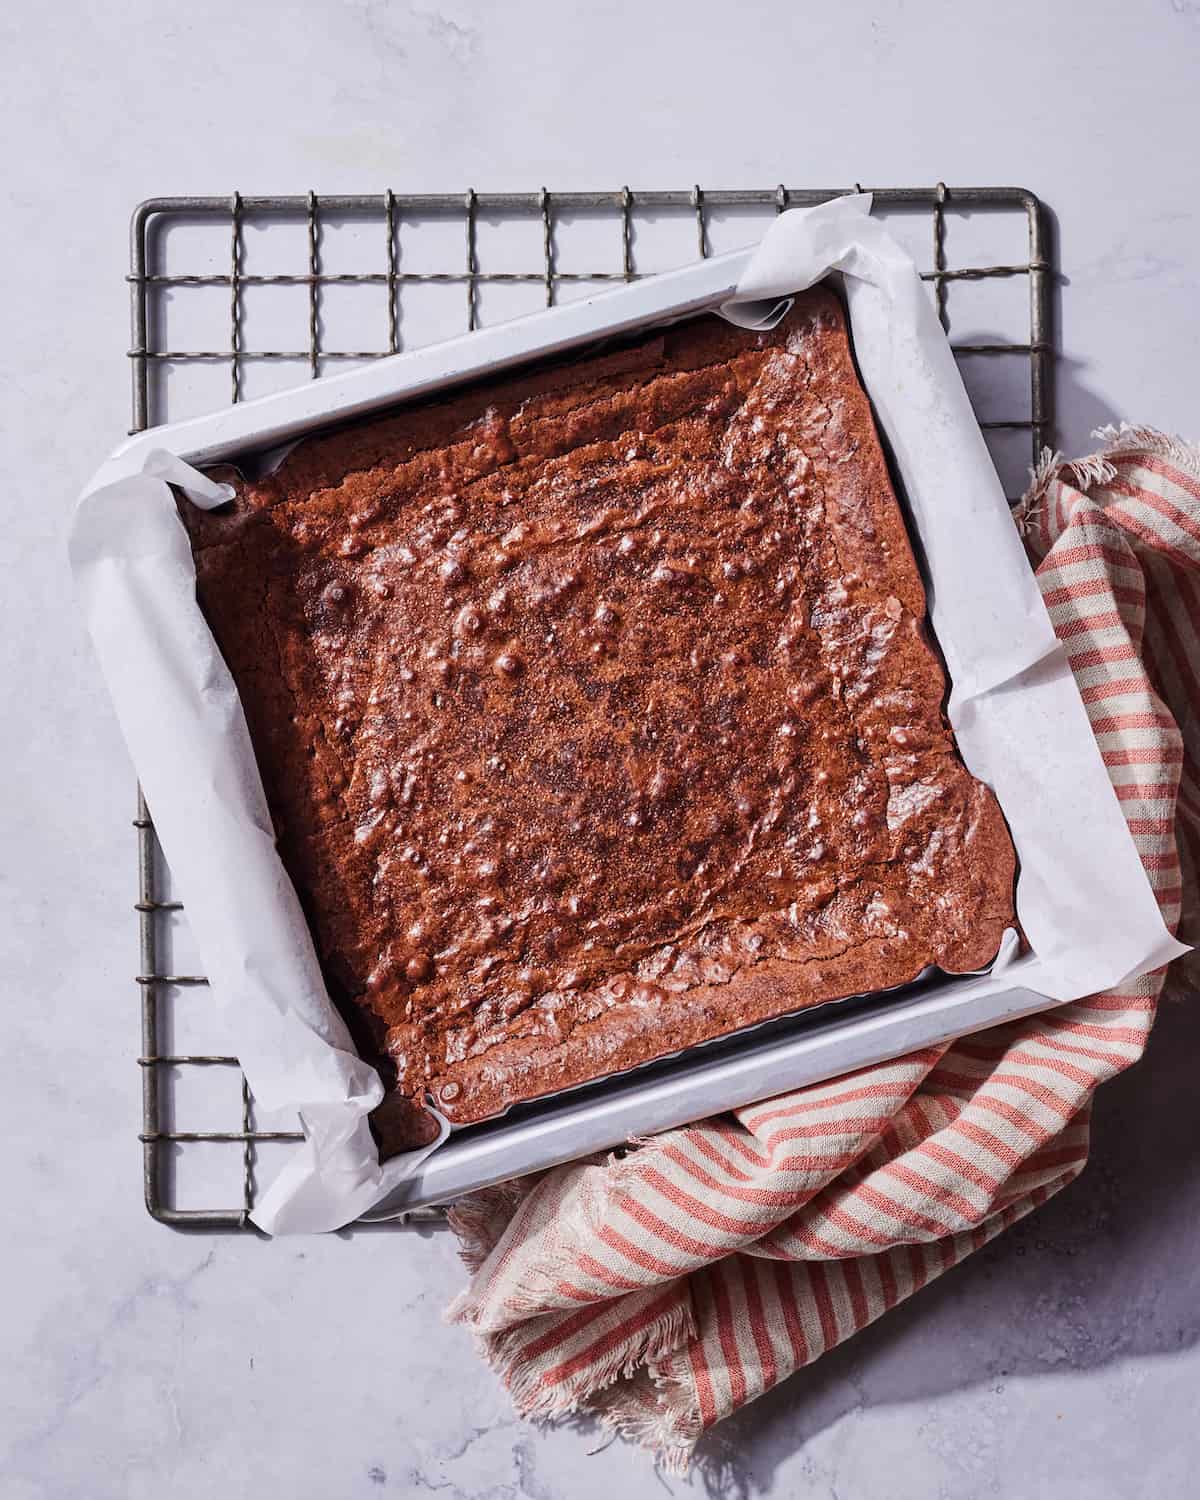 Freshly baked brownies in a 9x9 metal baking pan lined with parchment paper on a metal wire rack with an orange striped kitchen towel in the bottom right corner.